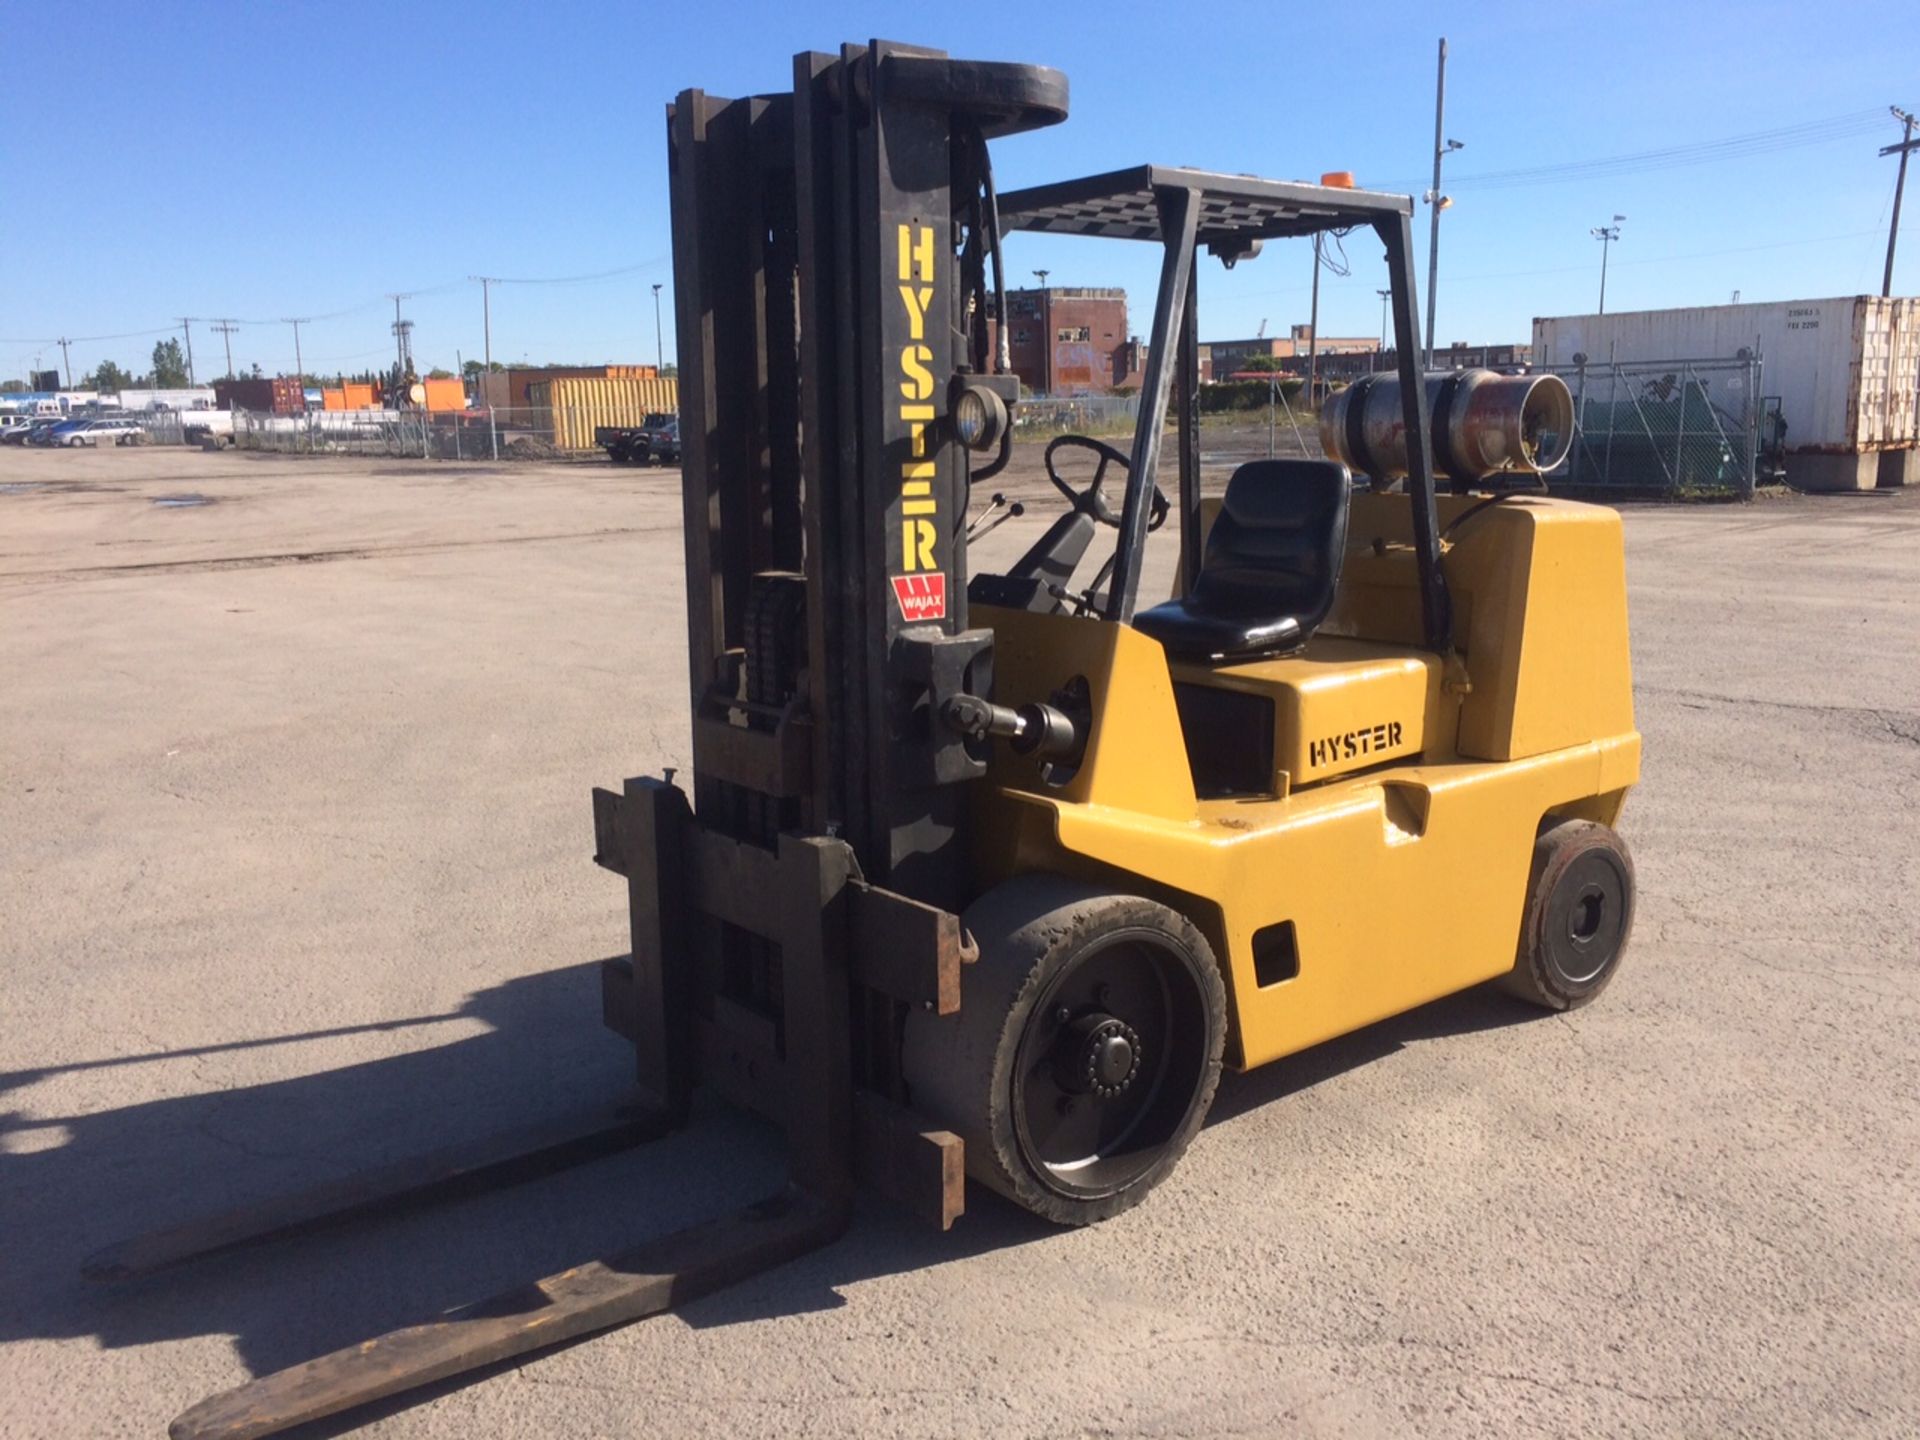 HYSTER 15 000 LBS PROPANE FORKLIFT MOD. S155XL, 161" HEIGHT, 3286 HOURS, S/N: B024D04082T - Image 2 of 6